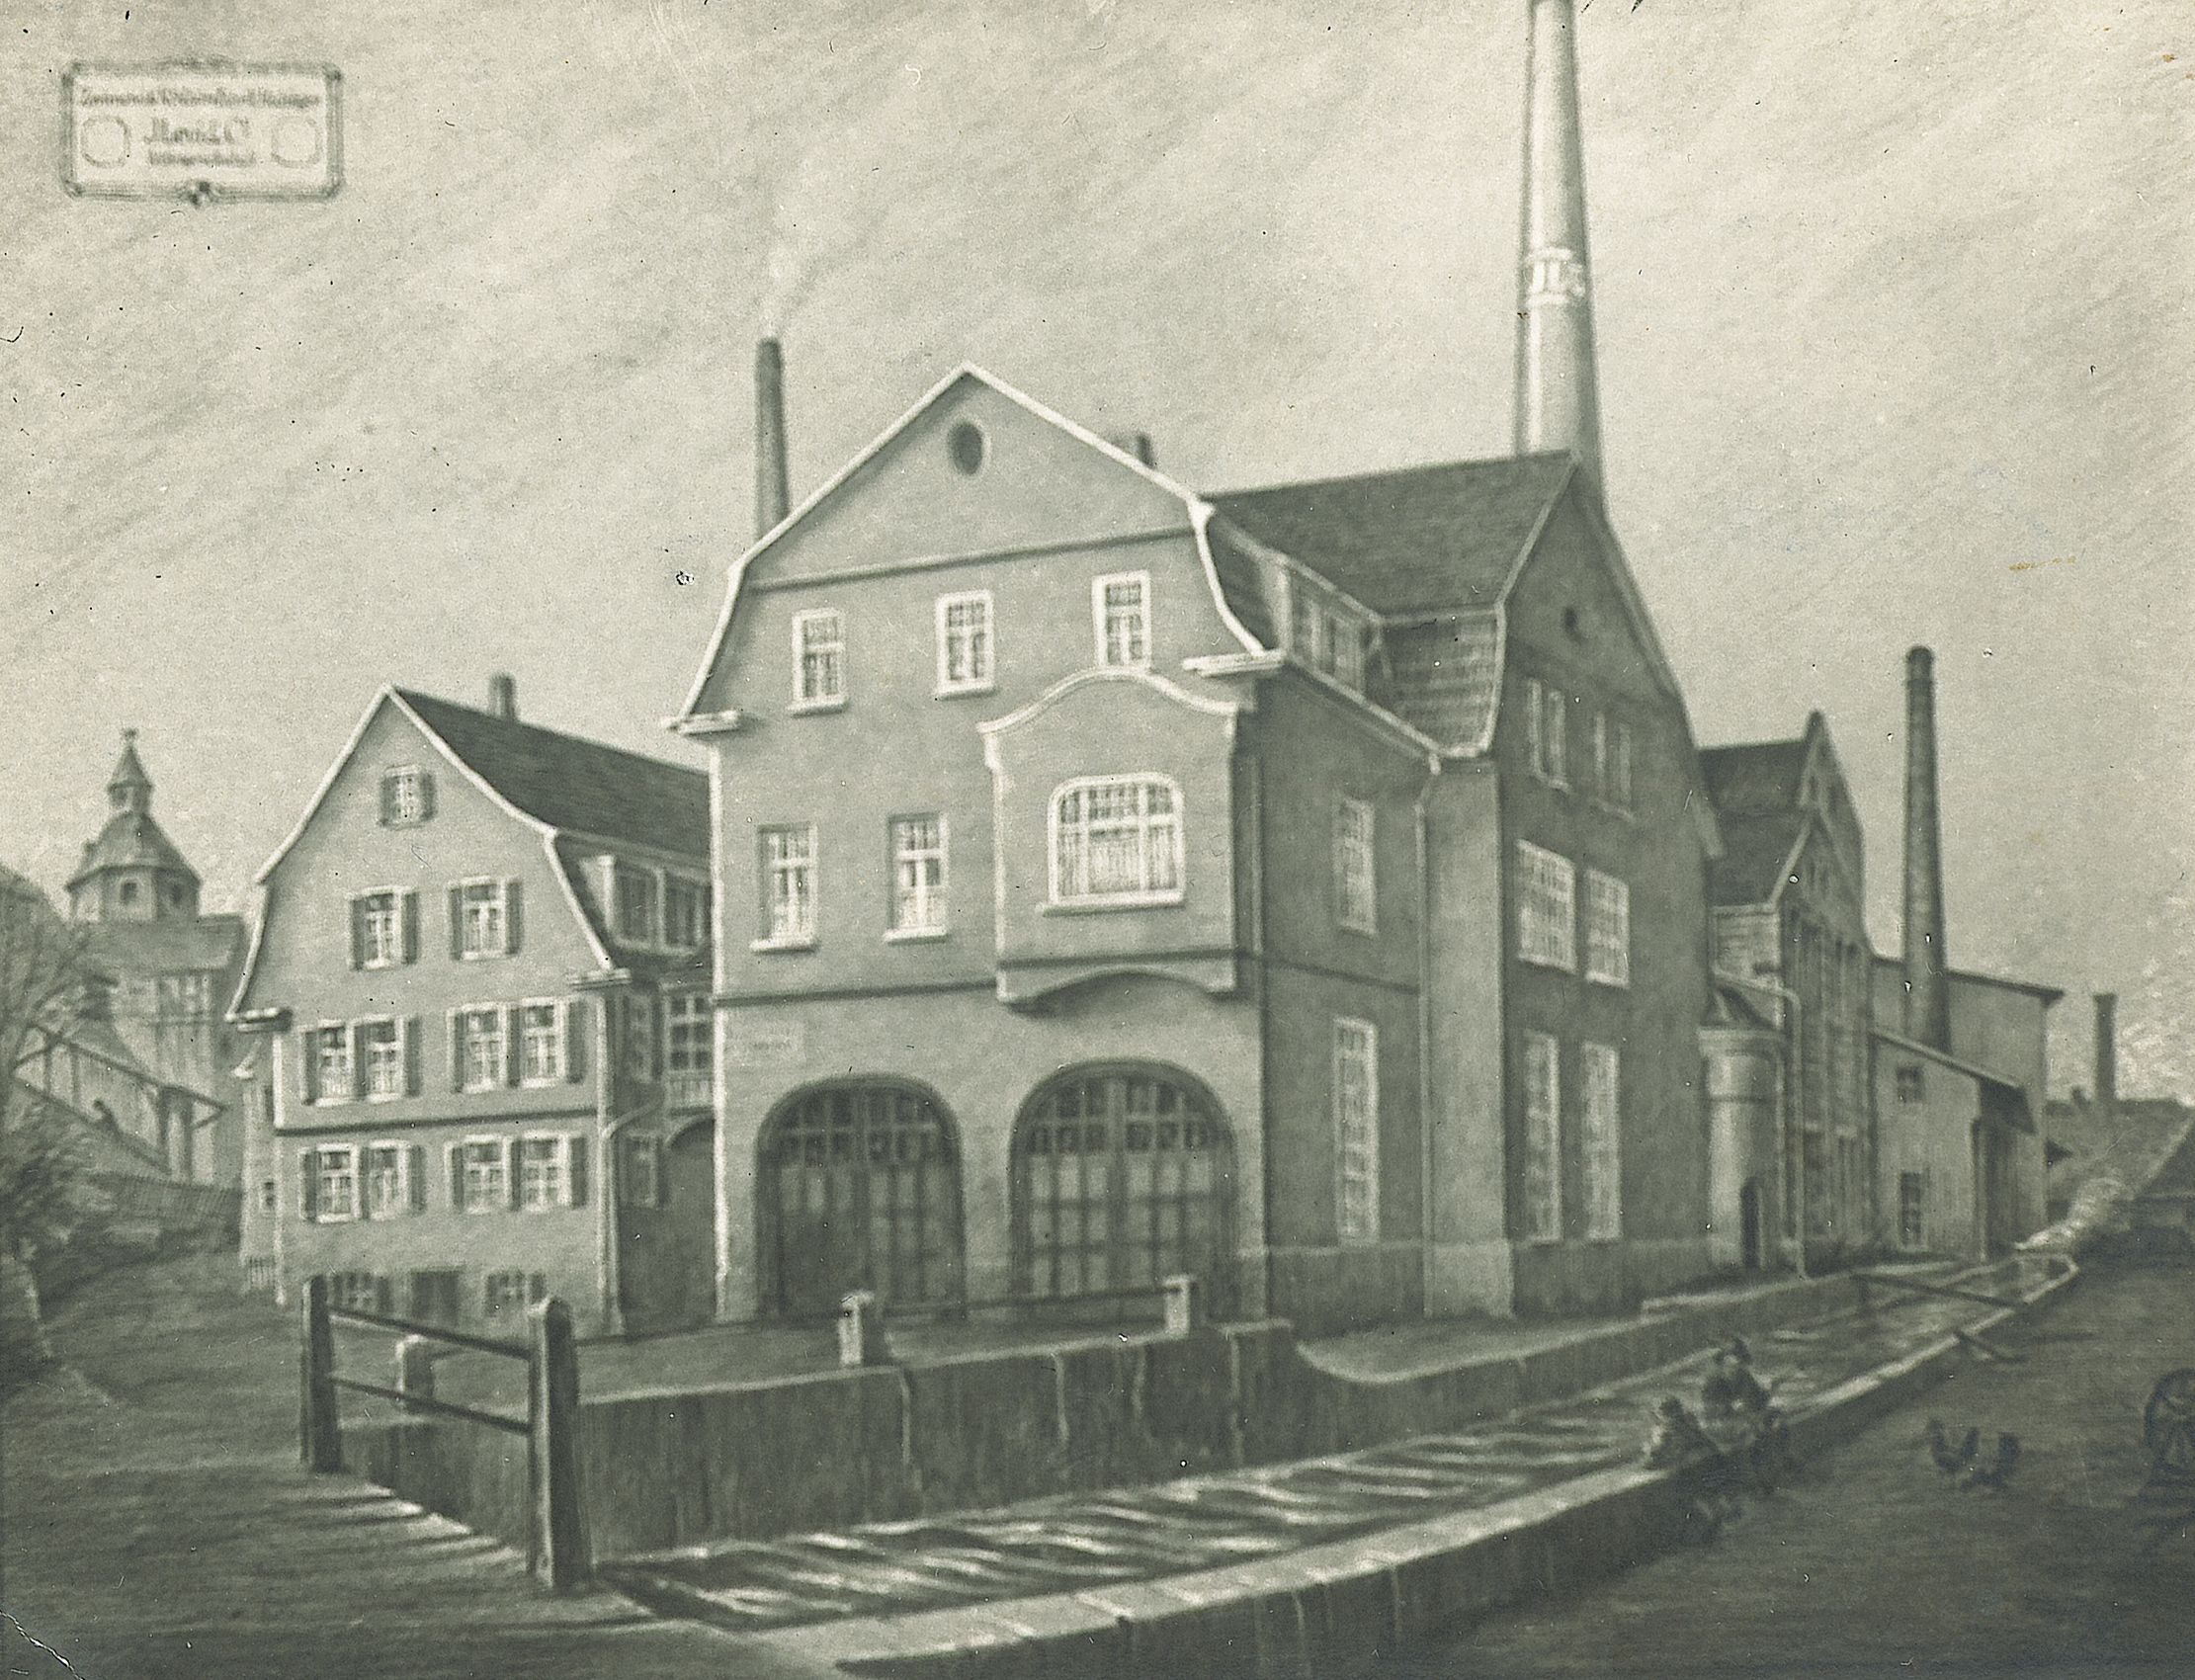 Levi & Co. company on the Mühlkanal in Hechingen